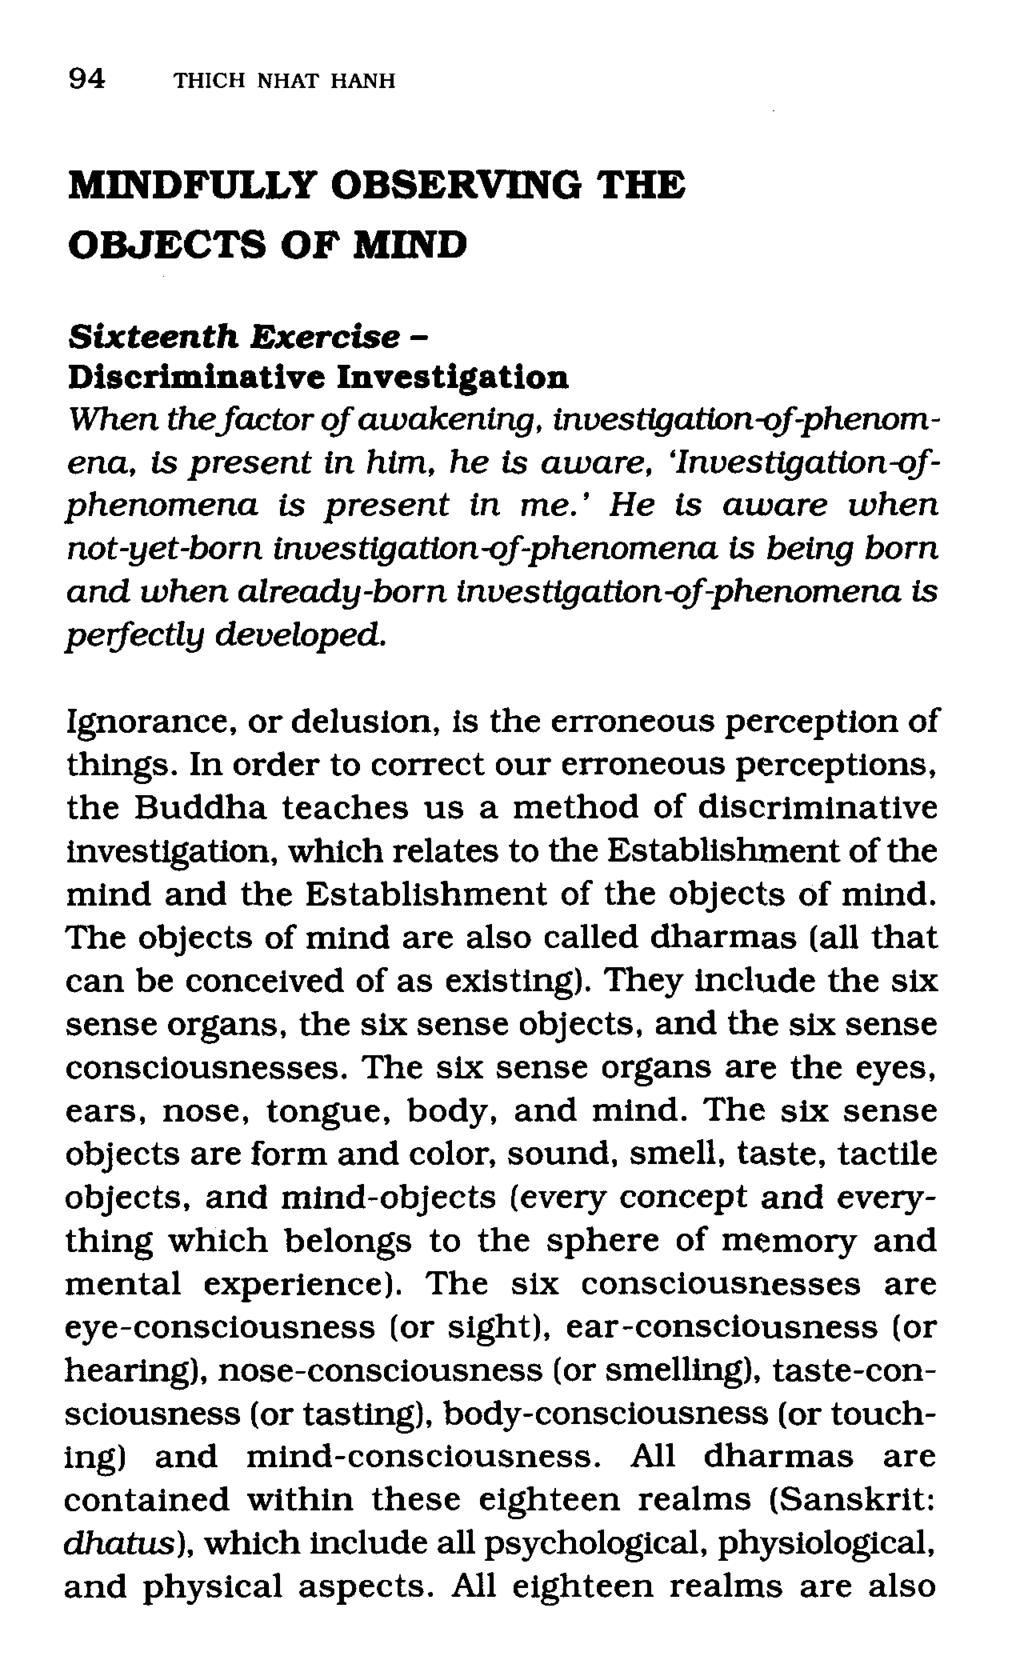 94 THICH NHAT HANH MINDFULLY OBSERVING THE OBJECTS OF MIND Sixteenth Exercise - Discriminative Investigation When the factor of awakening, investigation-of-phenornena, is present in him, he is aware,